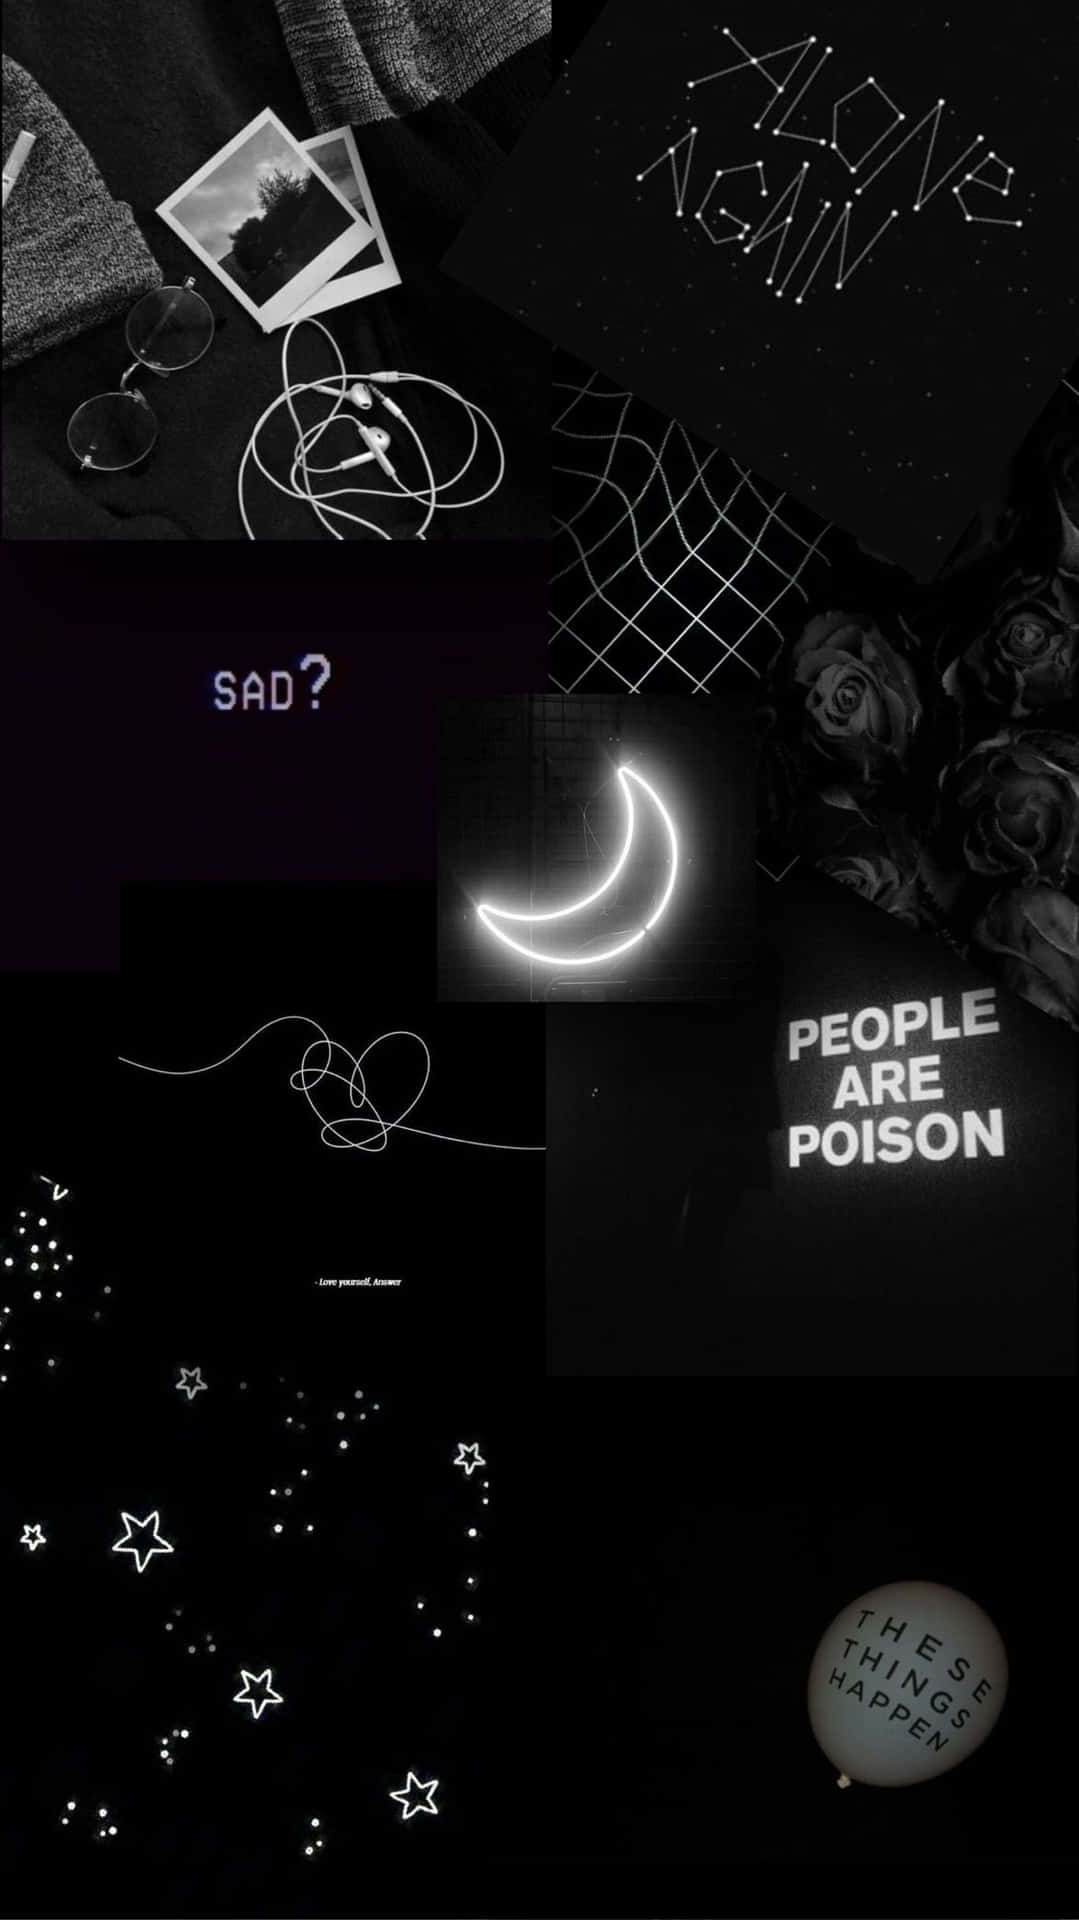 Download Dark Black Aesthetic Collage Poster Background | Wallpapers.com